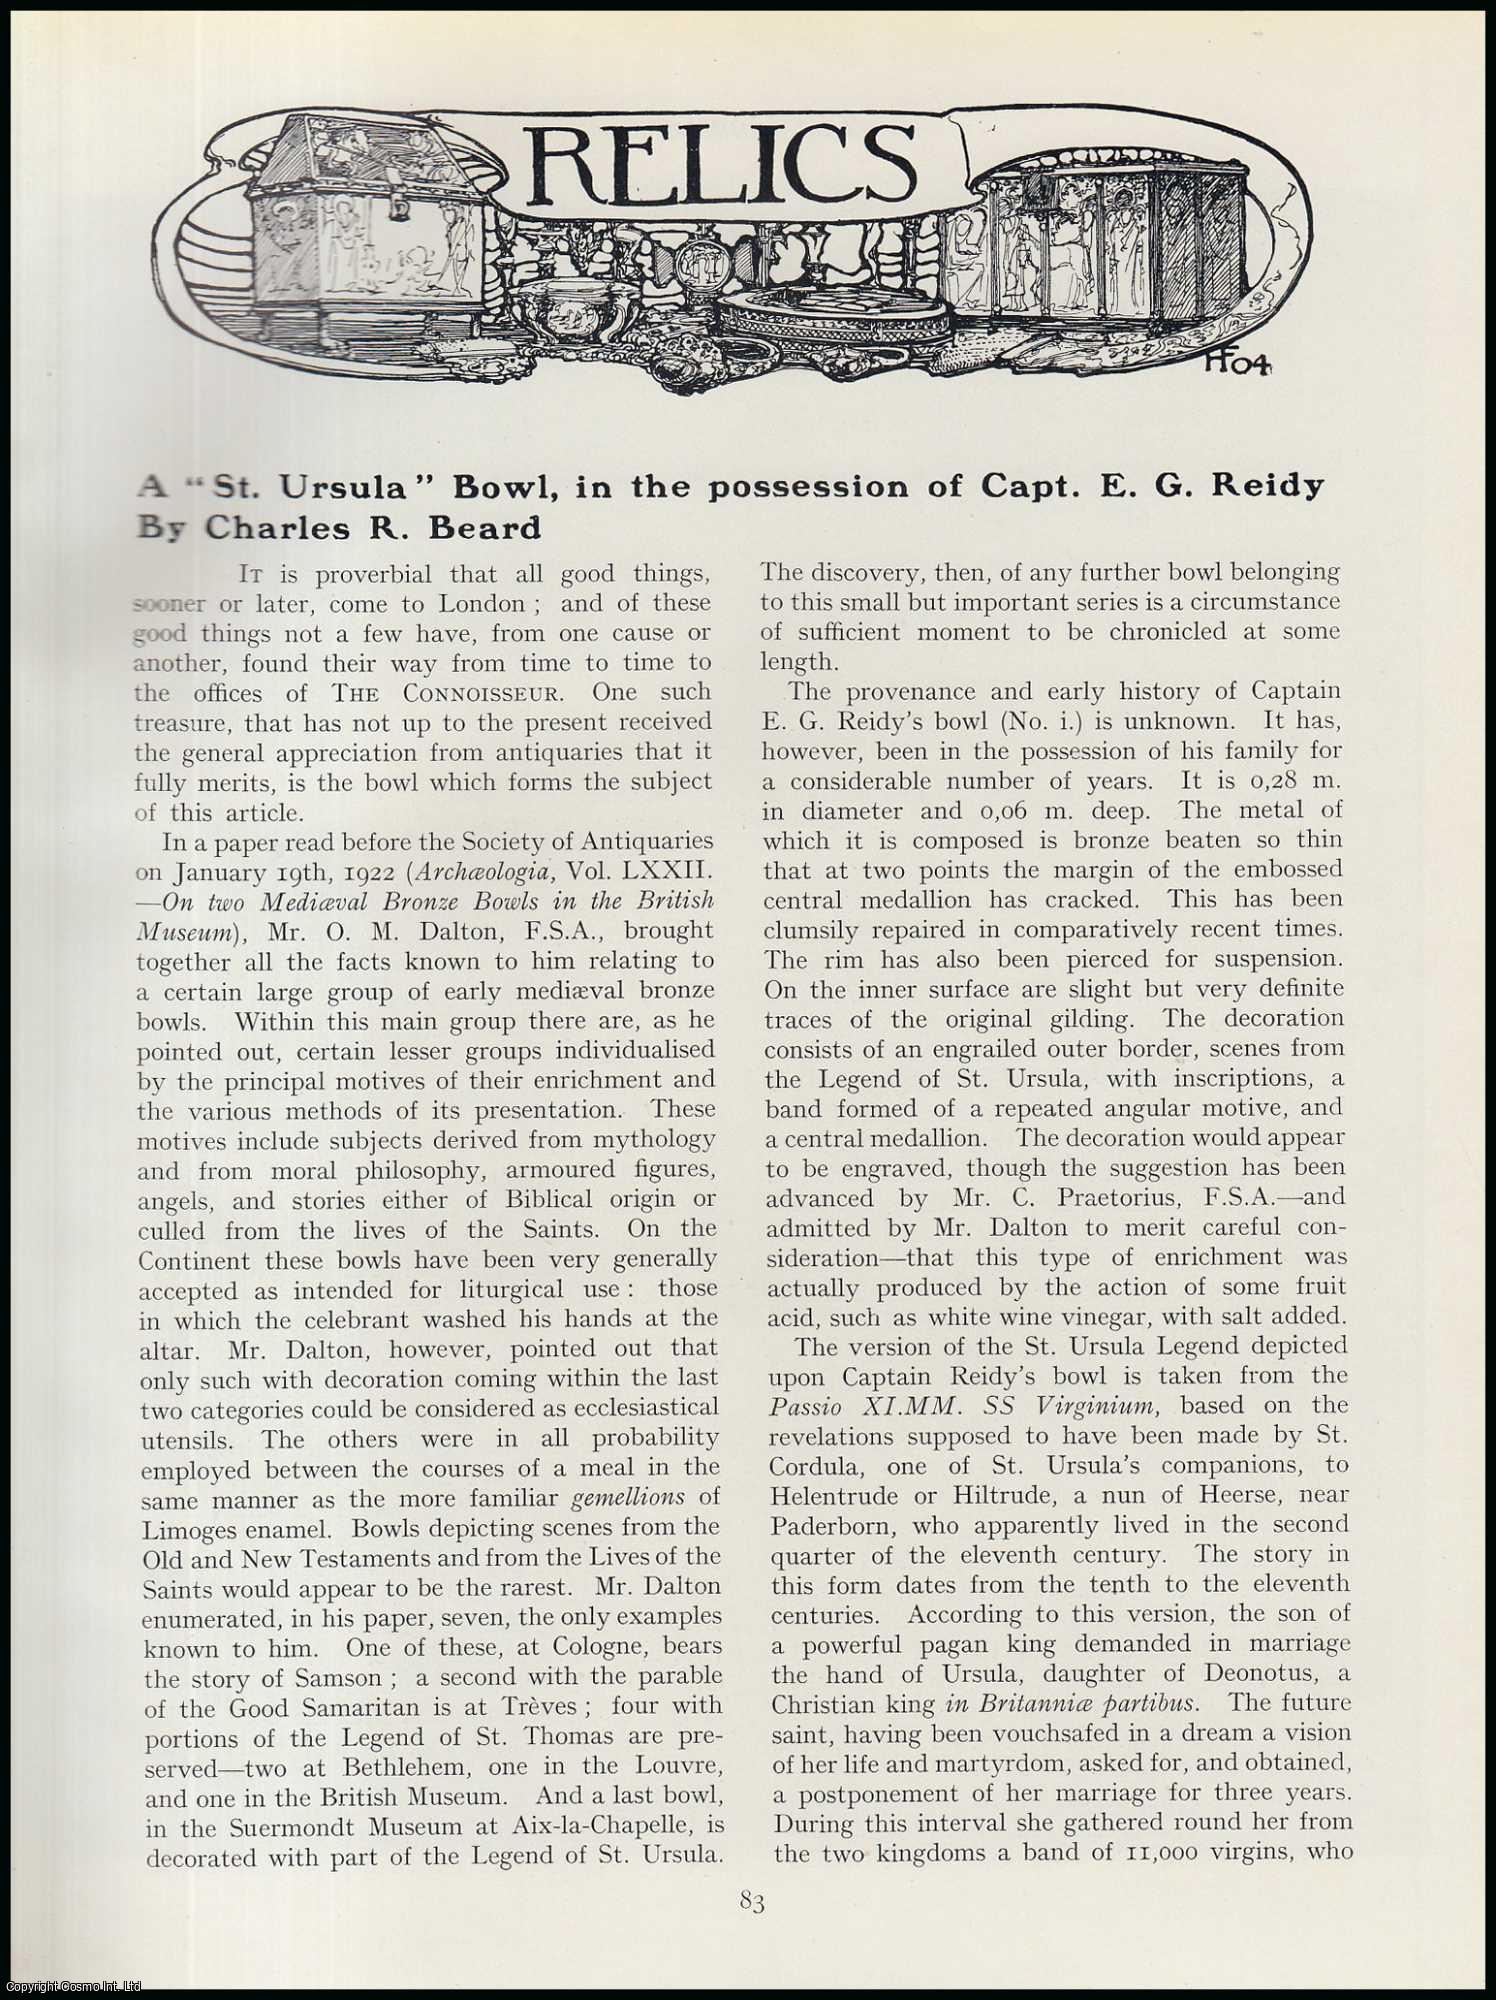 Charles R. Beard - A St. Ursula Bowl, in The Possession of Capt. E.G. Reidy. An original article from The Connoisseur, 1929.